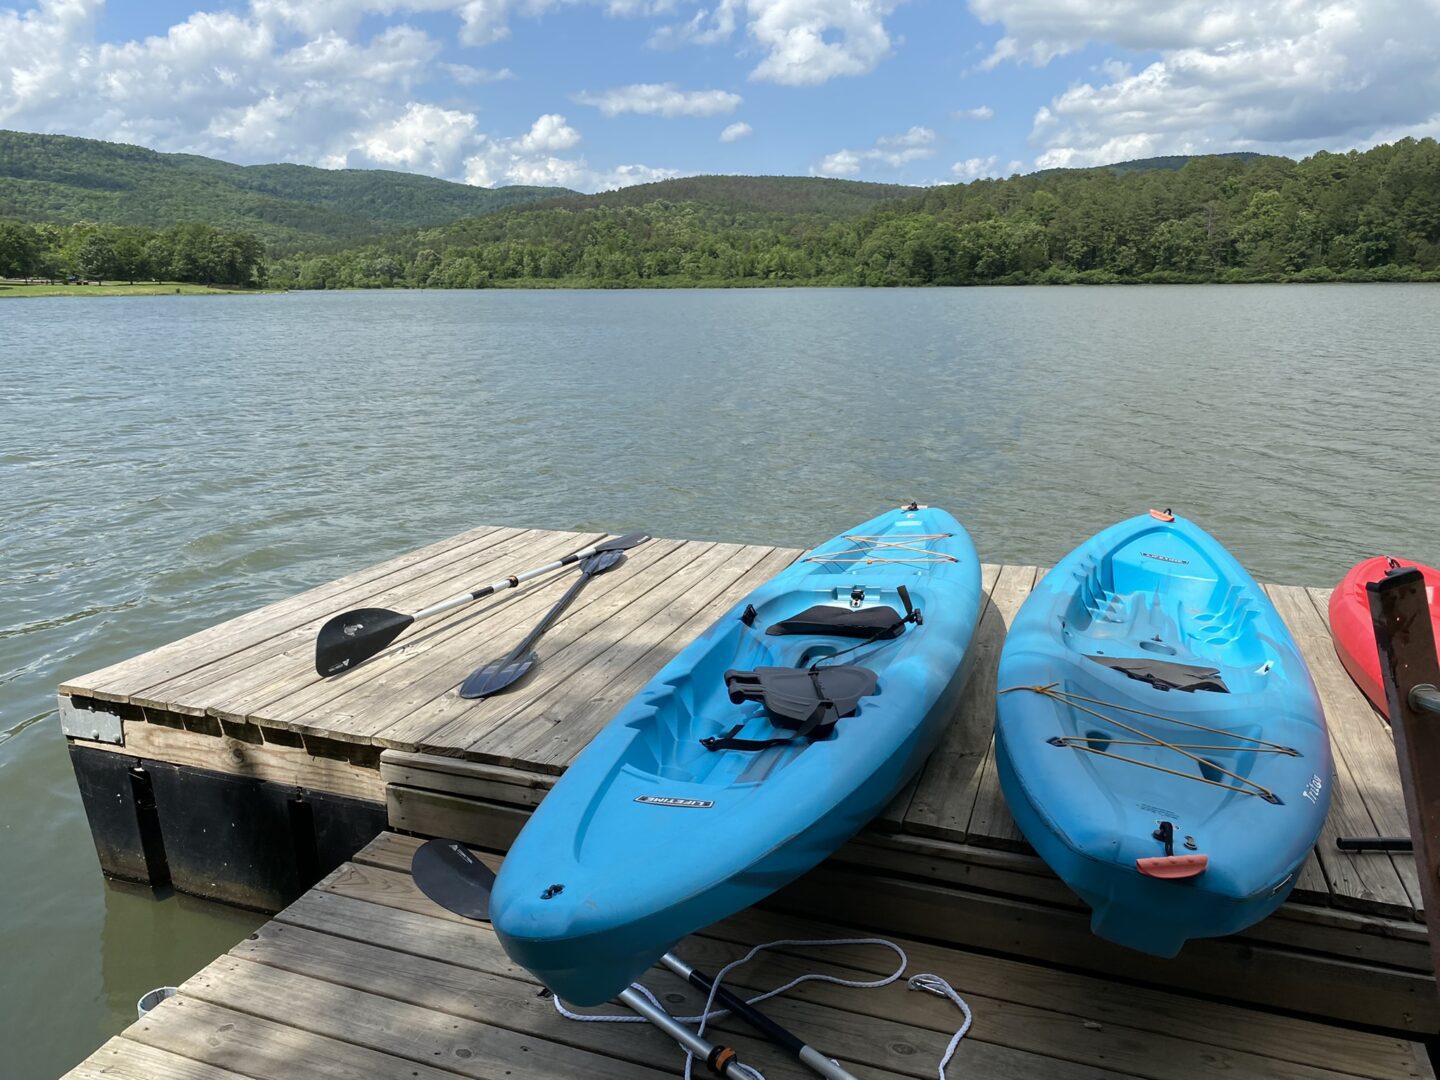 Two blue kayaks are docked on a dock.